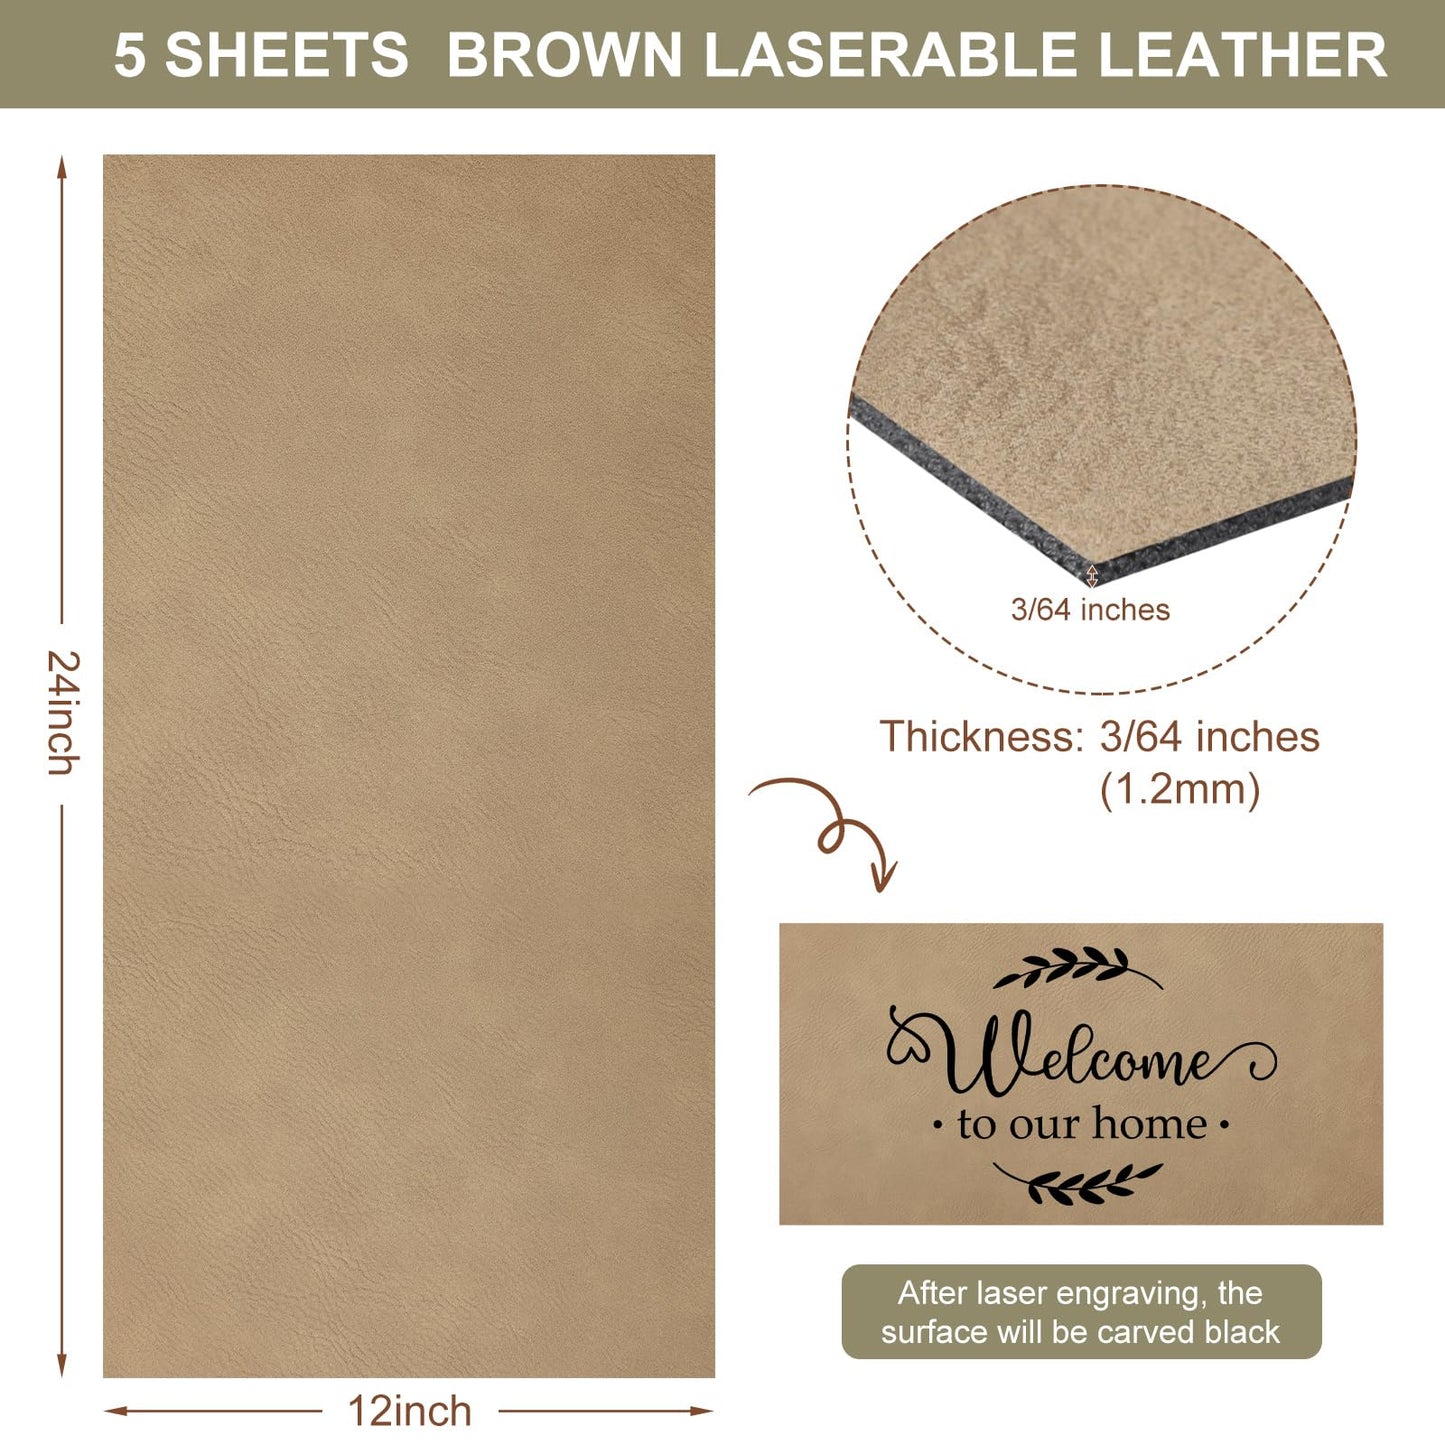 Huhumy 5 Pieces Laserable Leather Sheets 12 x 24 Inch Leatherette Sheets Brown Laser Leather Laser Engraving Supplies for Laser Engraving Art Craft